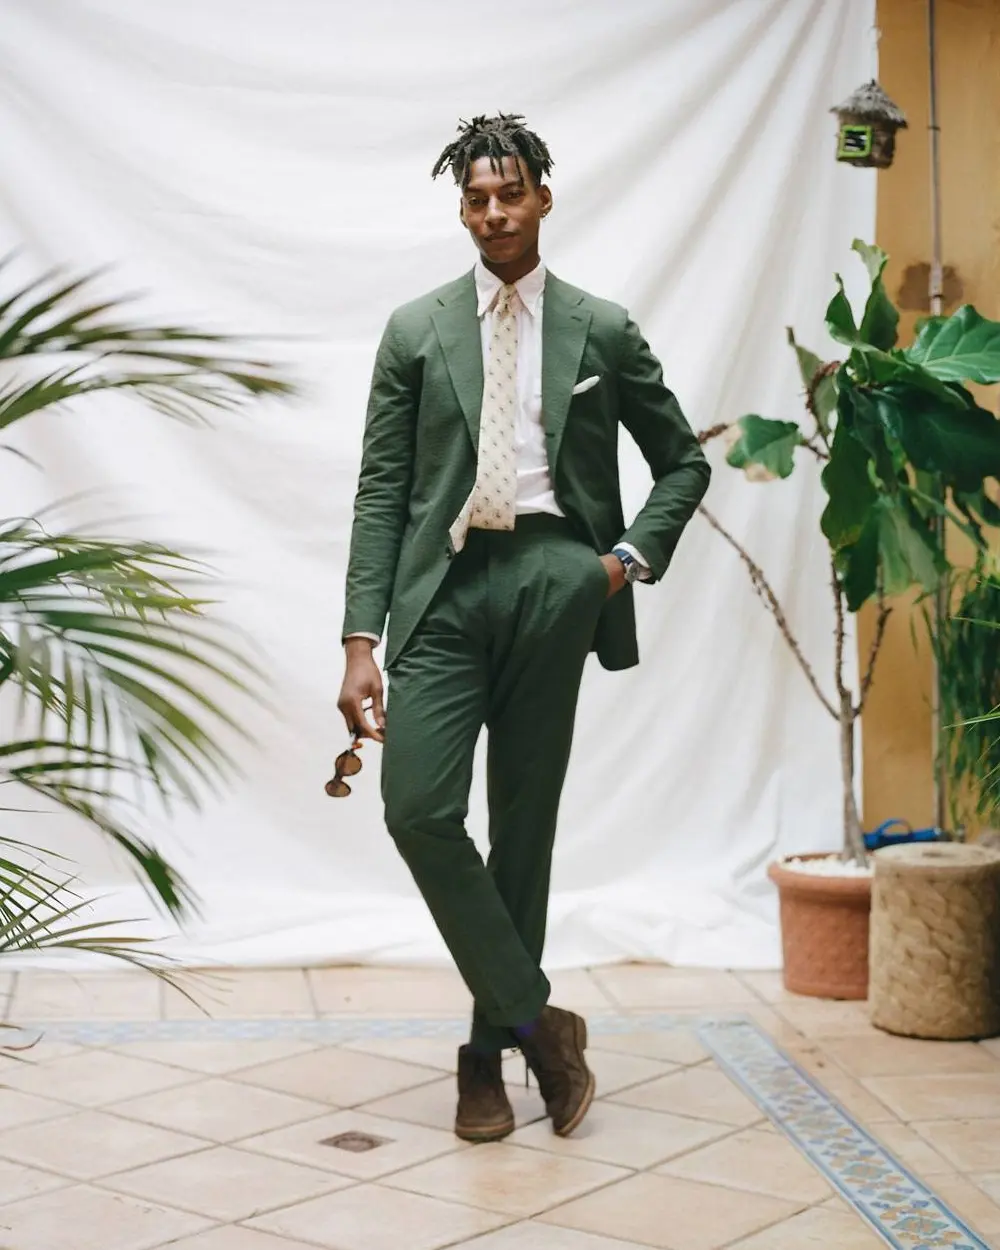 The Casual Suit: Finally Understand How to Wear a Suit Casually +